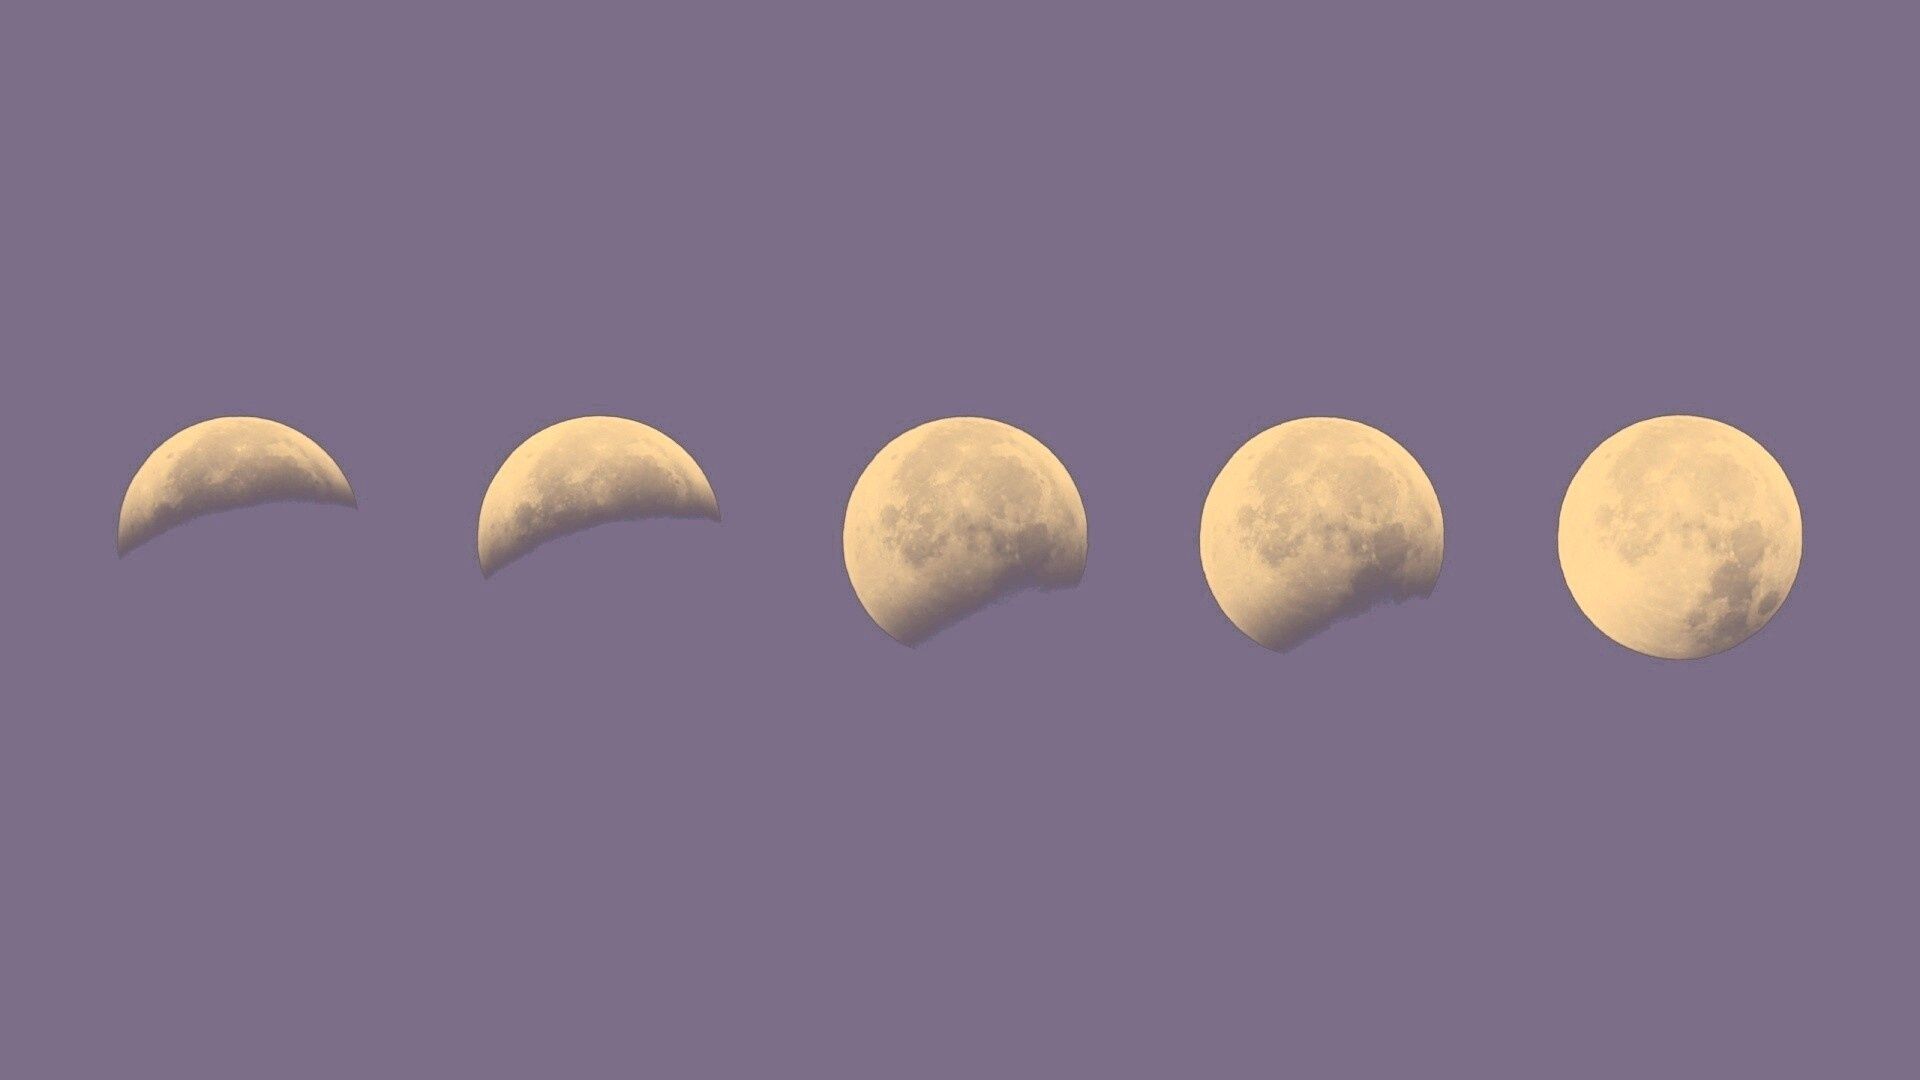 Moon phases on a purple background - Moon phases